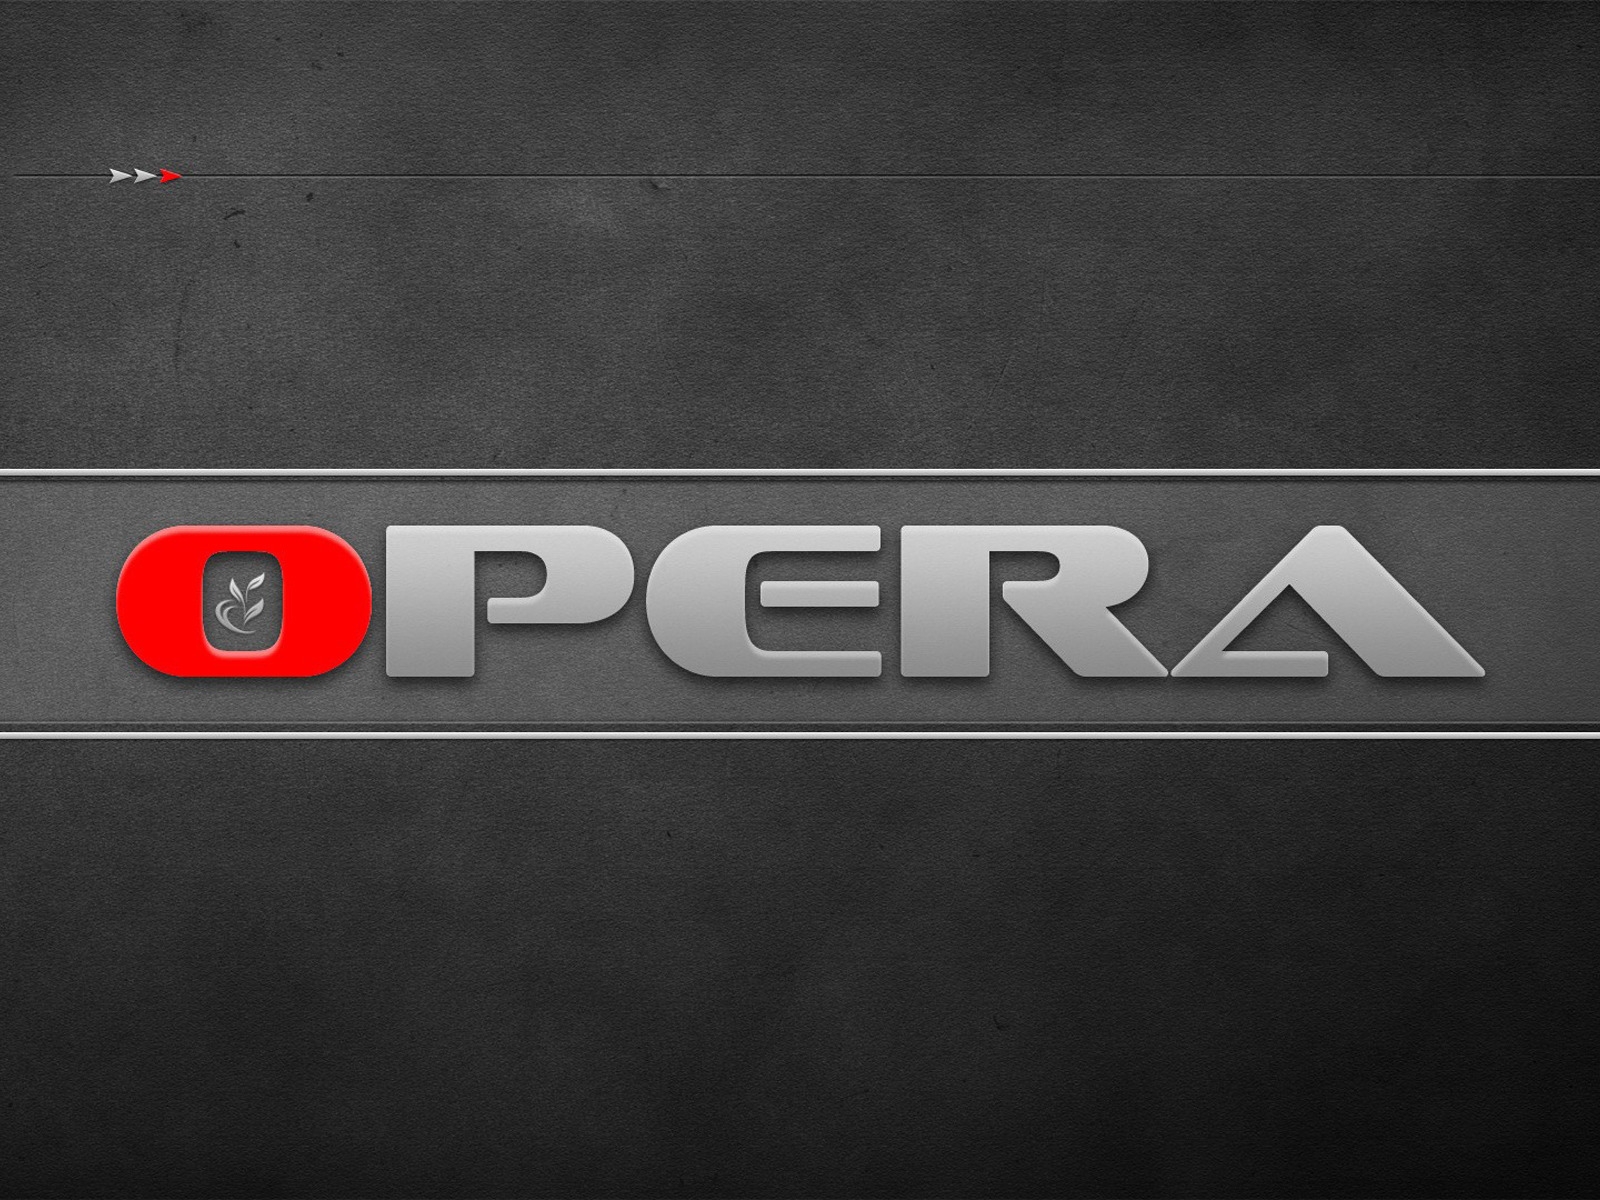 Opera for 1600 x 1200 resolution